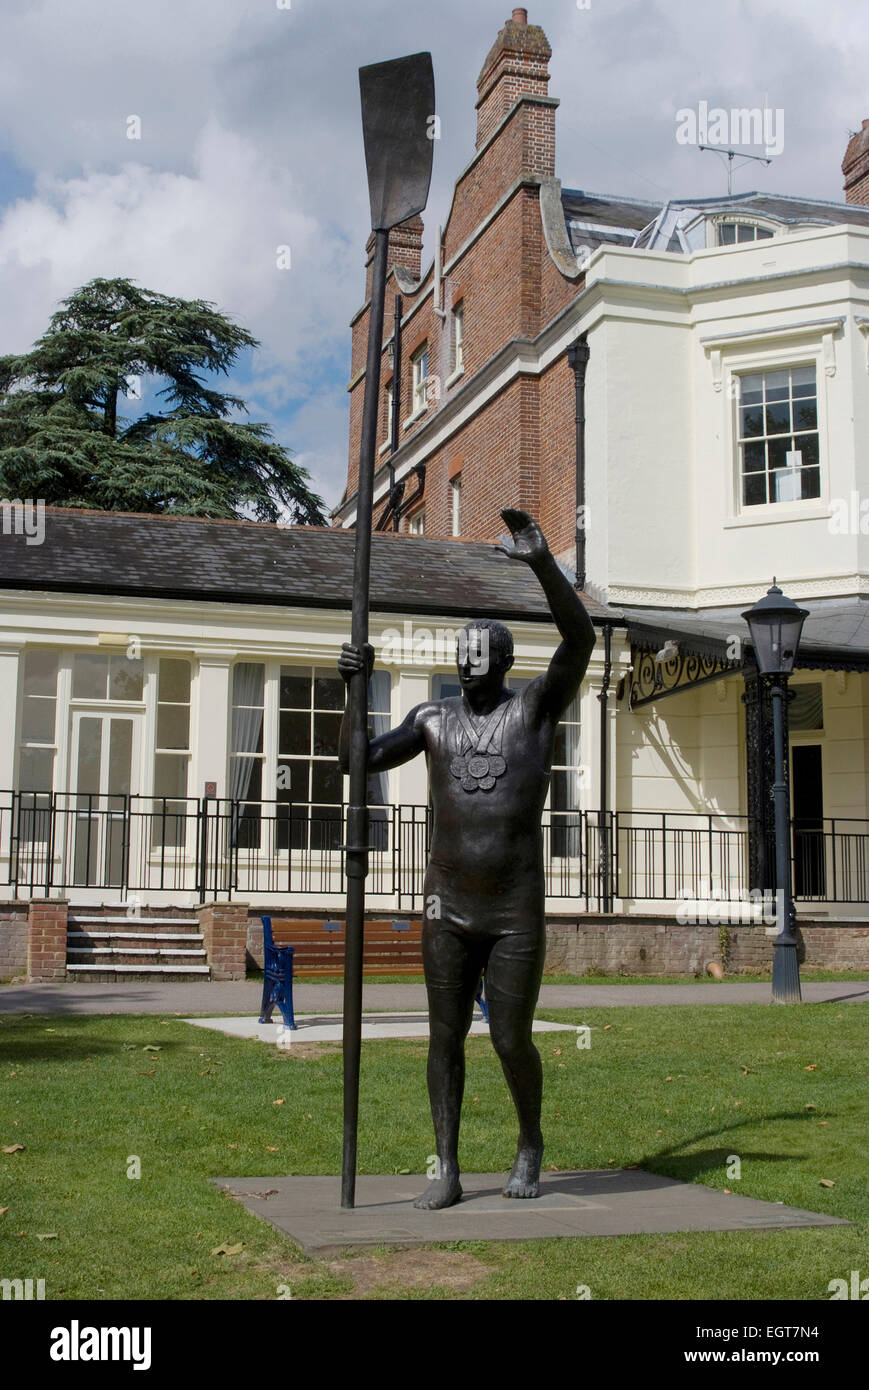 Statue of Steve Redgrave, Olympic rower, Marlow, Buckinghamshire, England Stock Photo